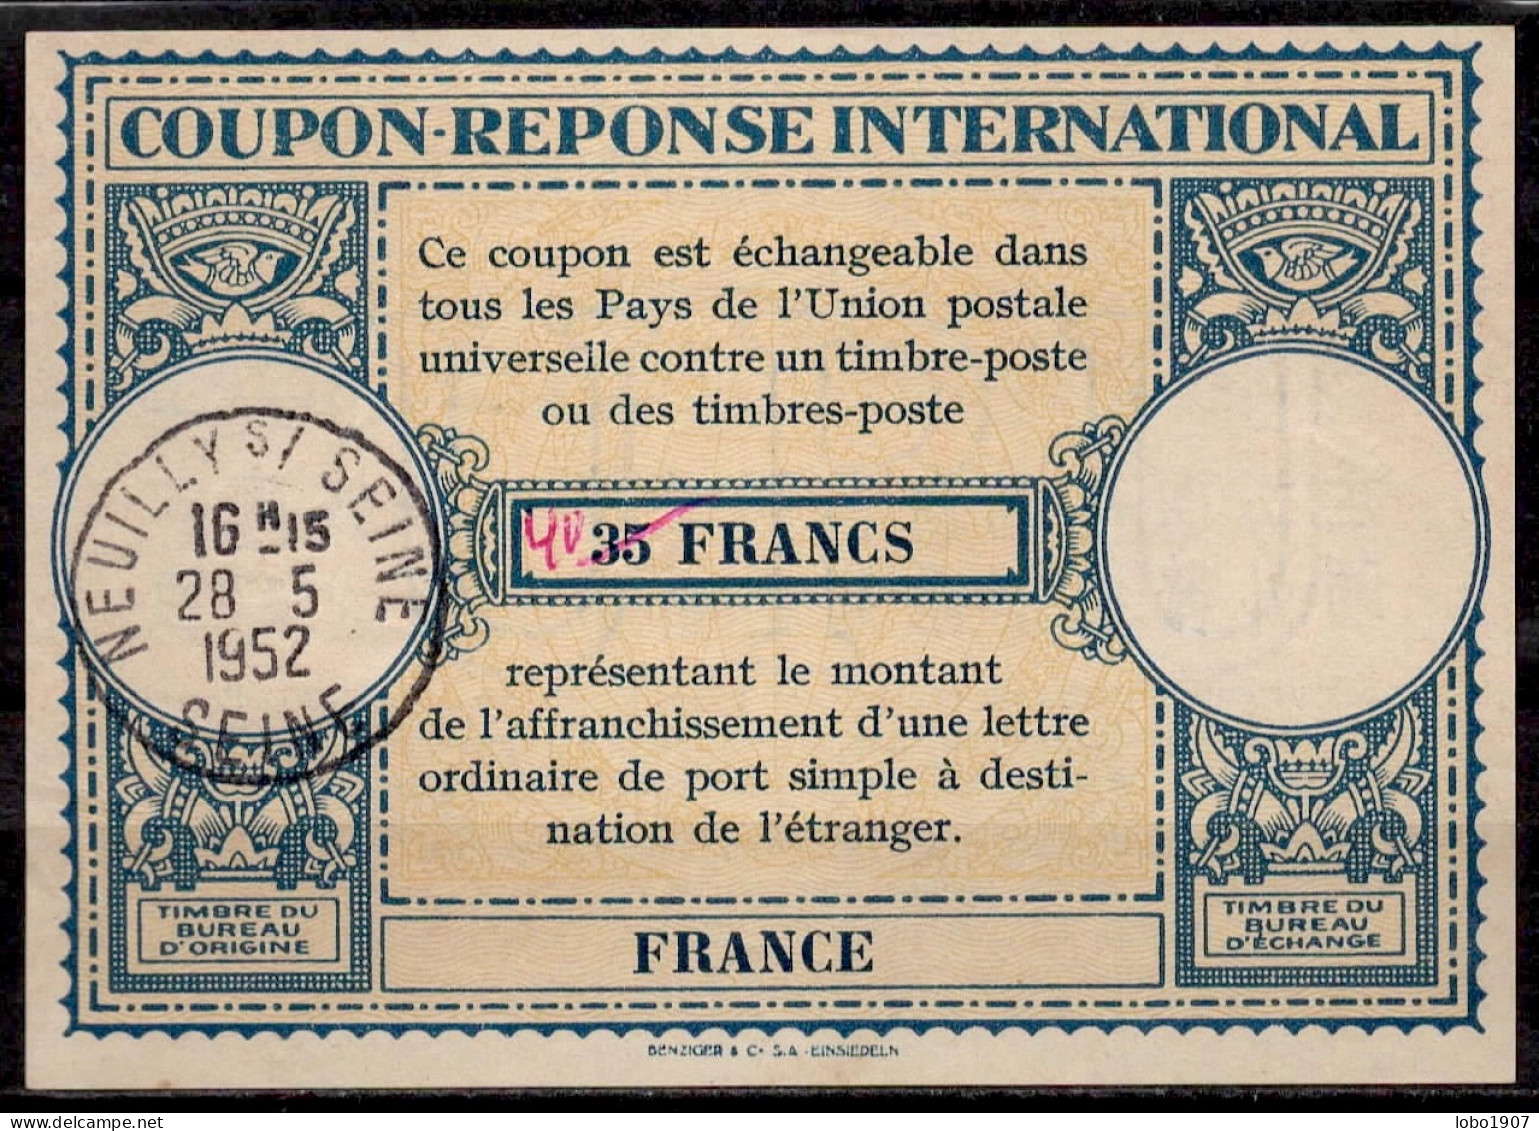 FRANCE 1951 Lo15  40 / 35 FRANCE  International Reply Coupon Reponse Antwortschein Cupon Respuesta  IRC IAS  O NEUILLY S - Buoni Risposte